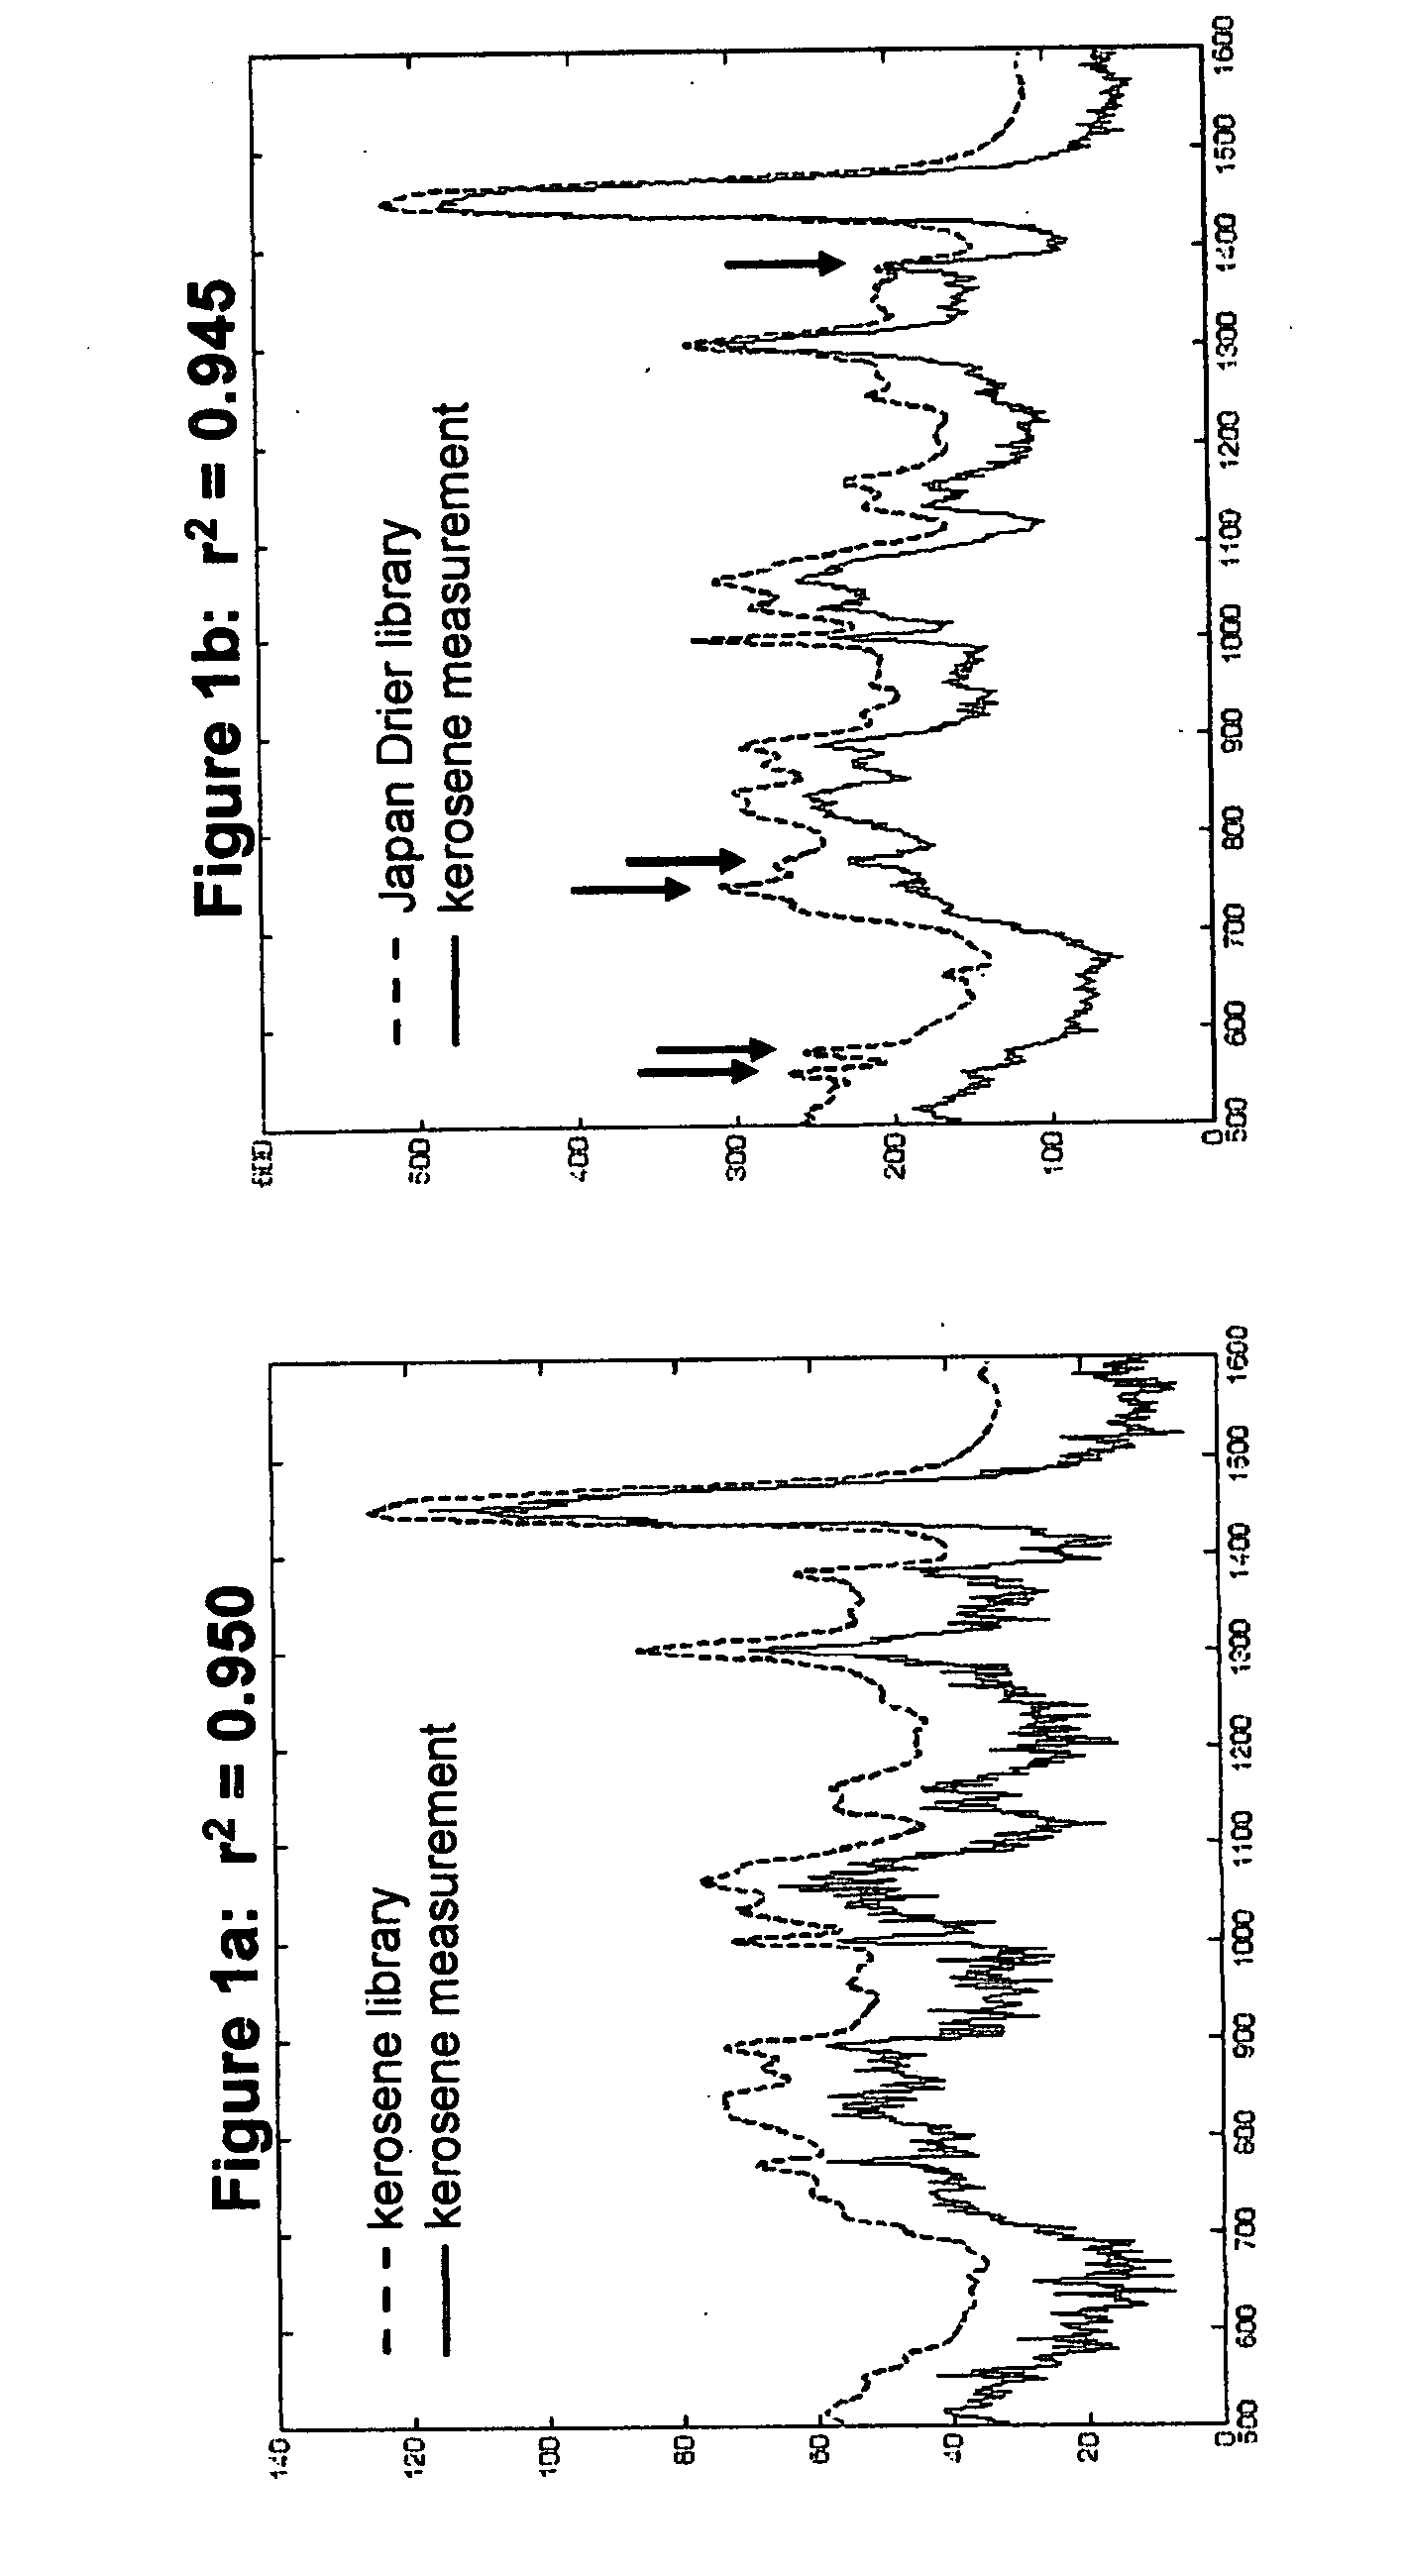 Spectrum searching method that uses non-chemical qualities of the measurement